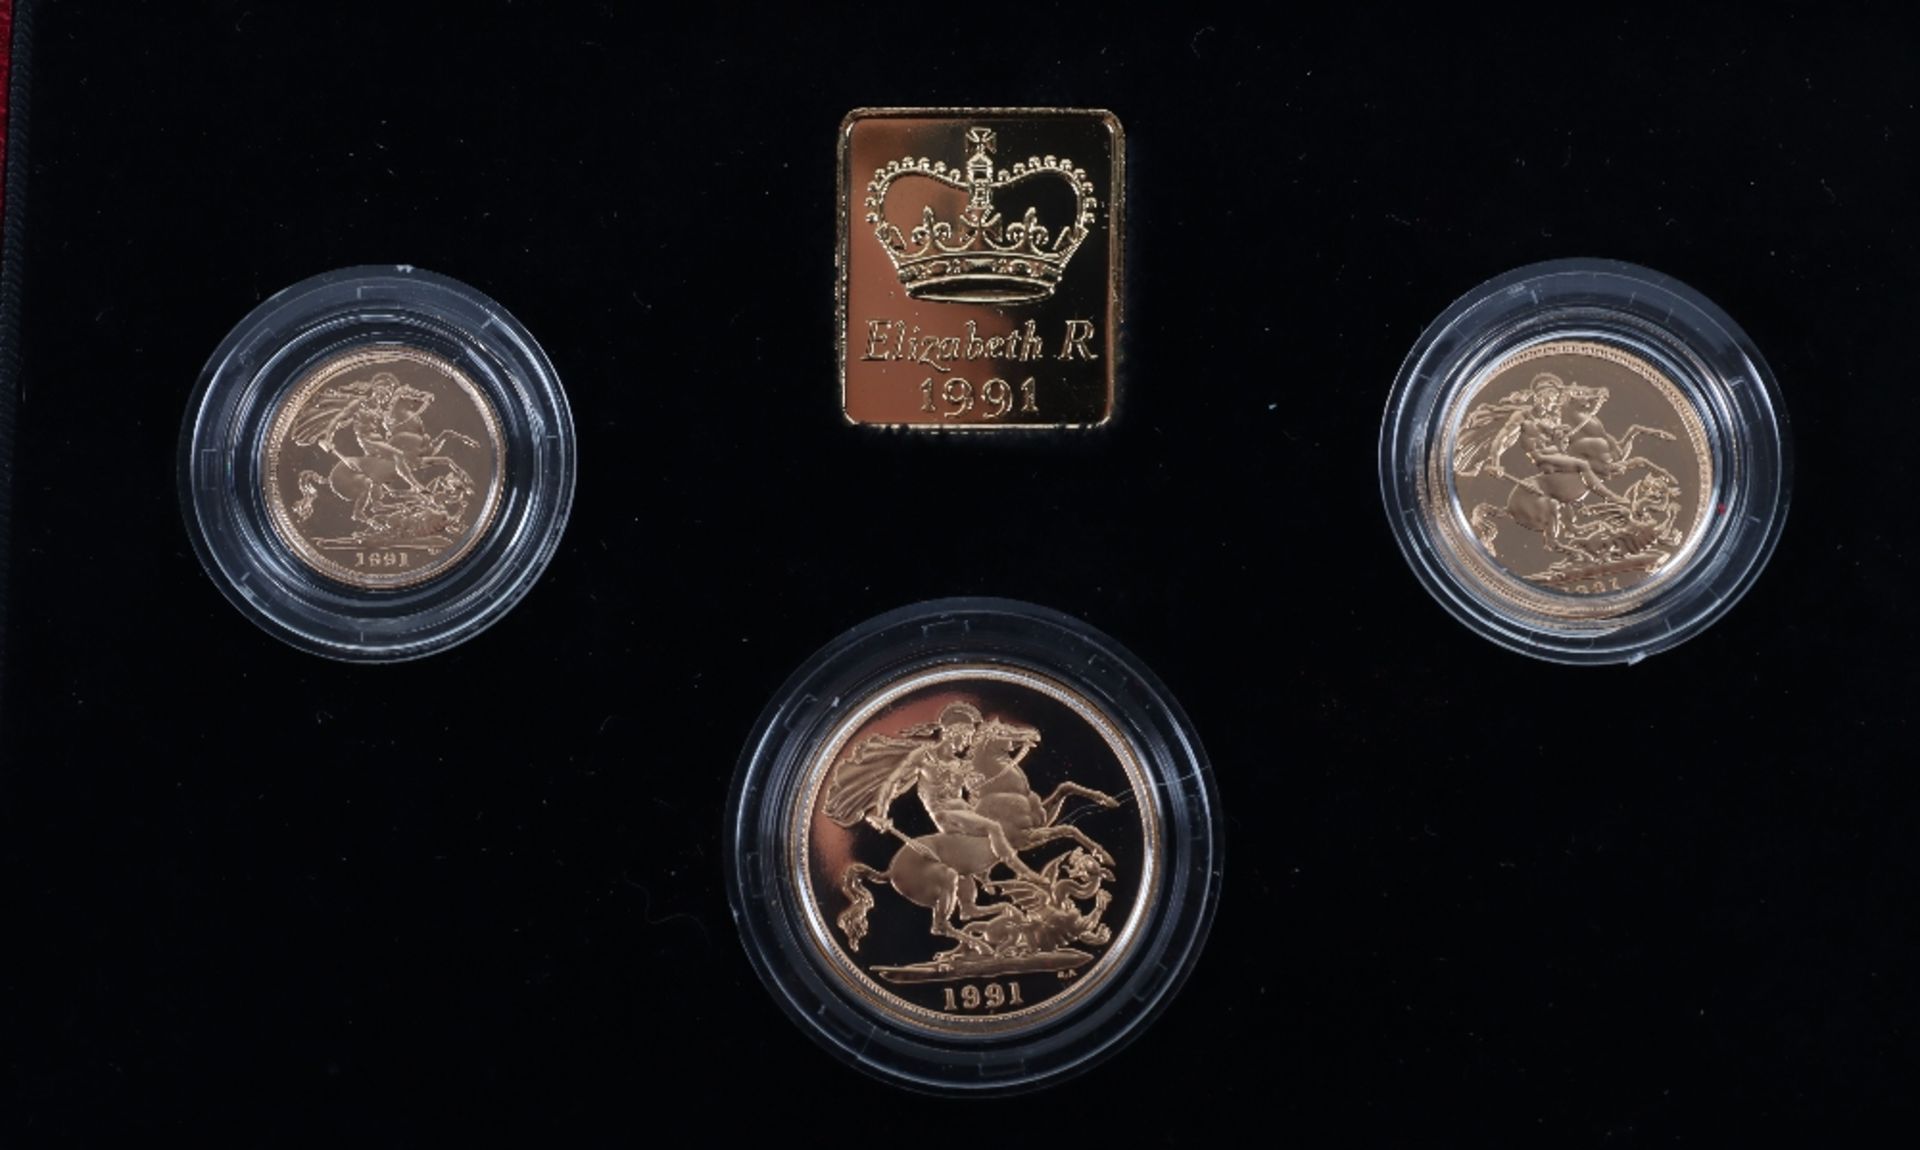 1991 Gold Proof Sovereign Three Coin Set - Image 4 of 4